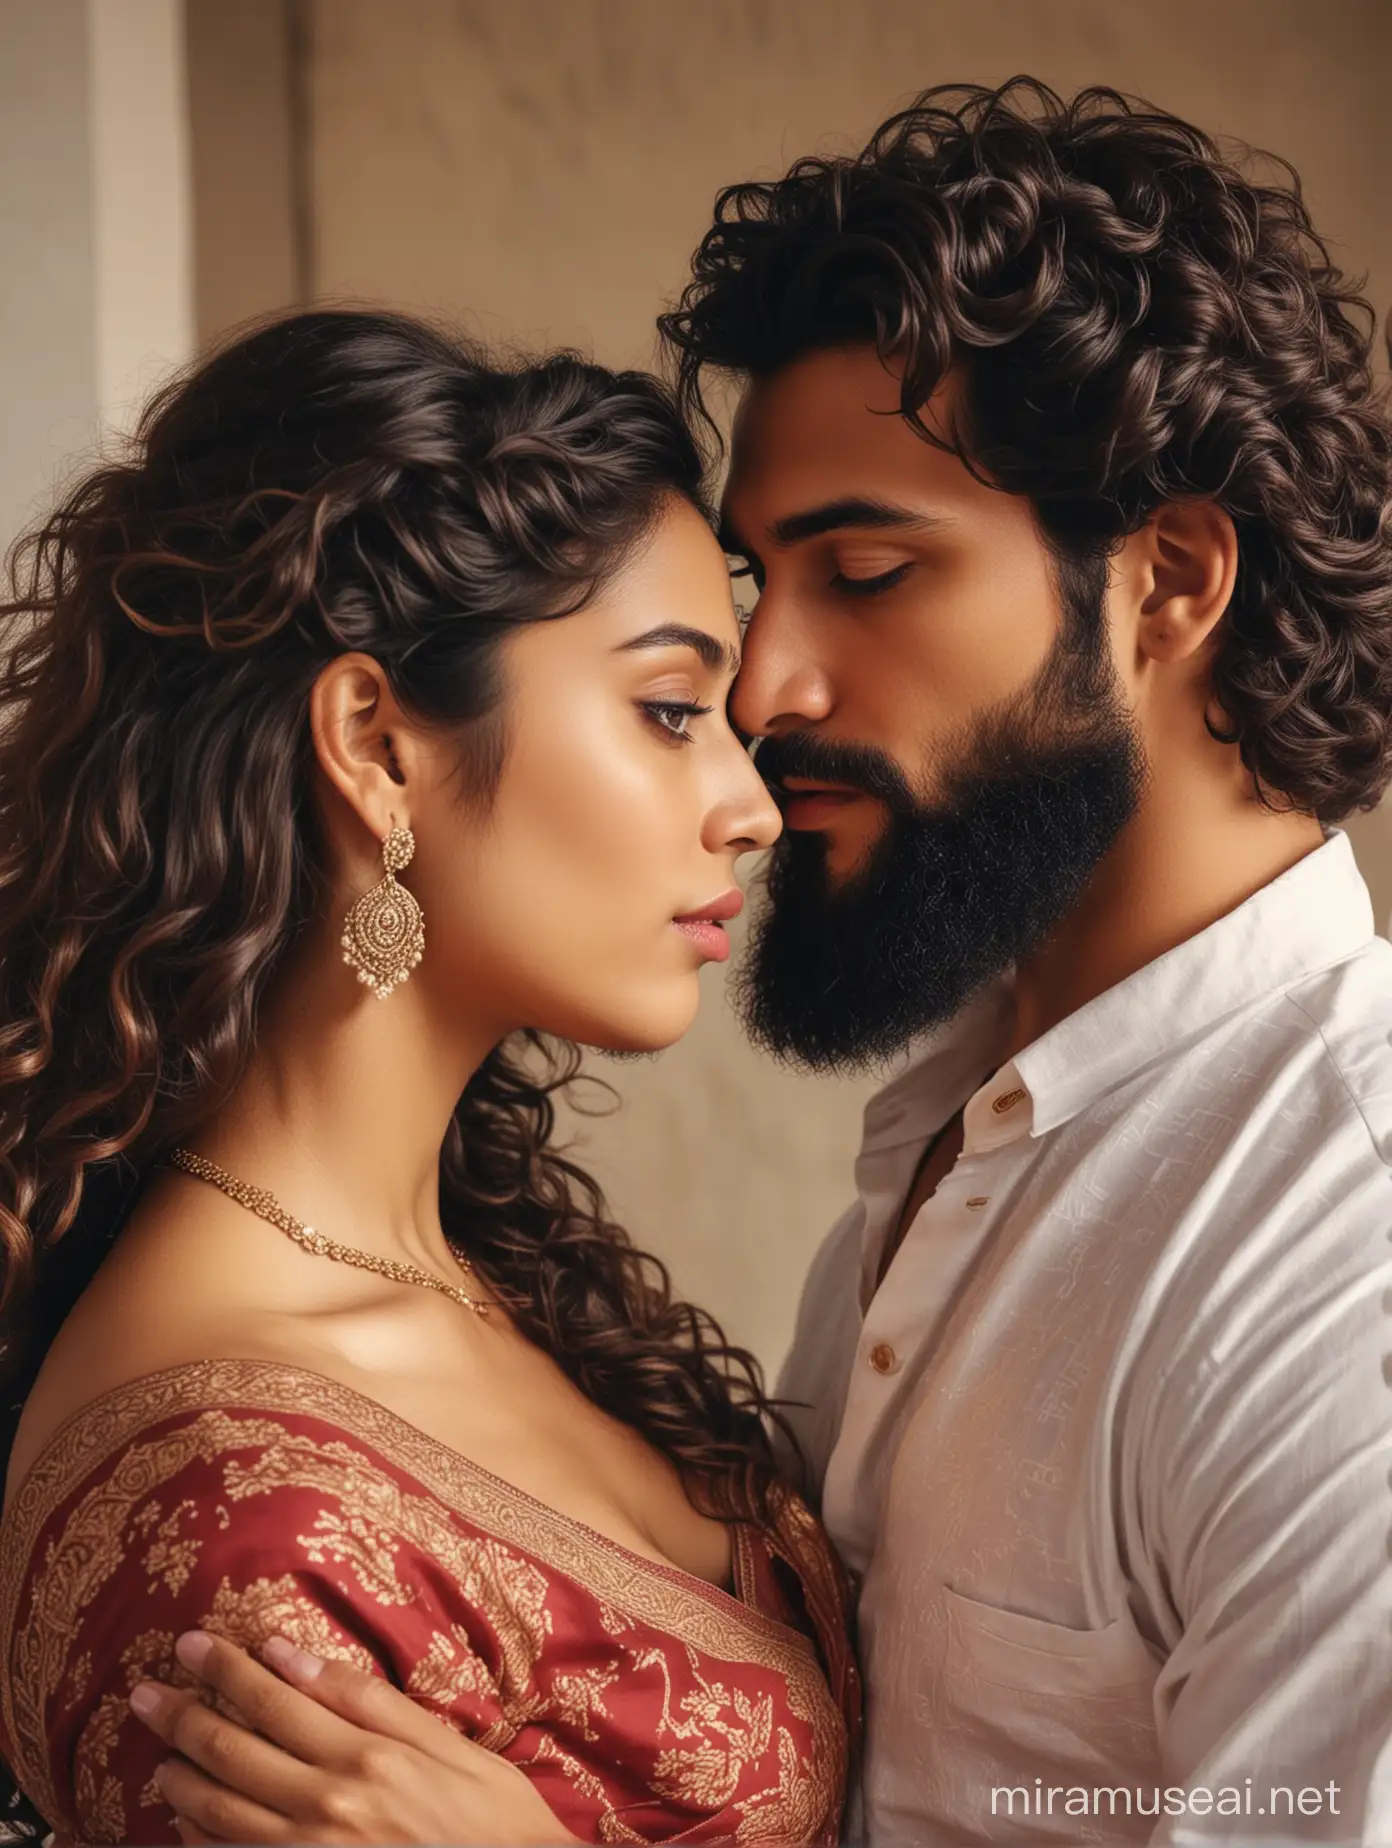 two intimate lovers,   european handsome mAn, most handsome european man with indian features, elegant and arrogant looks, alfa male, fashionable beard,  beard, alfa male, most beautiful indian girl, elegant saree look, curly long hair, touching her fore head to chest  with emotion, low cut back
photo realistic, 4k.